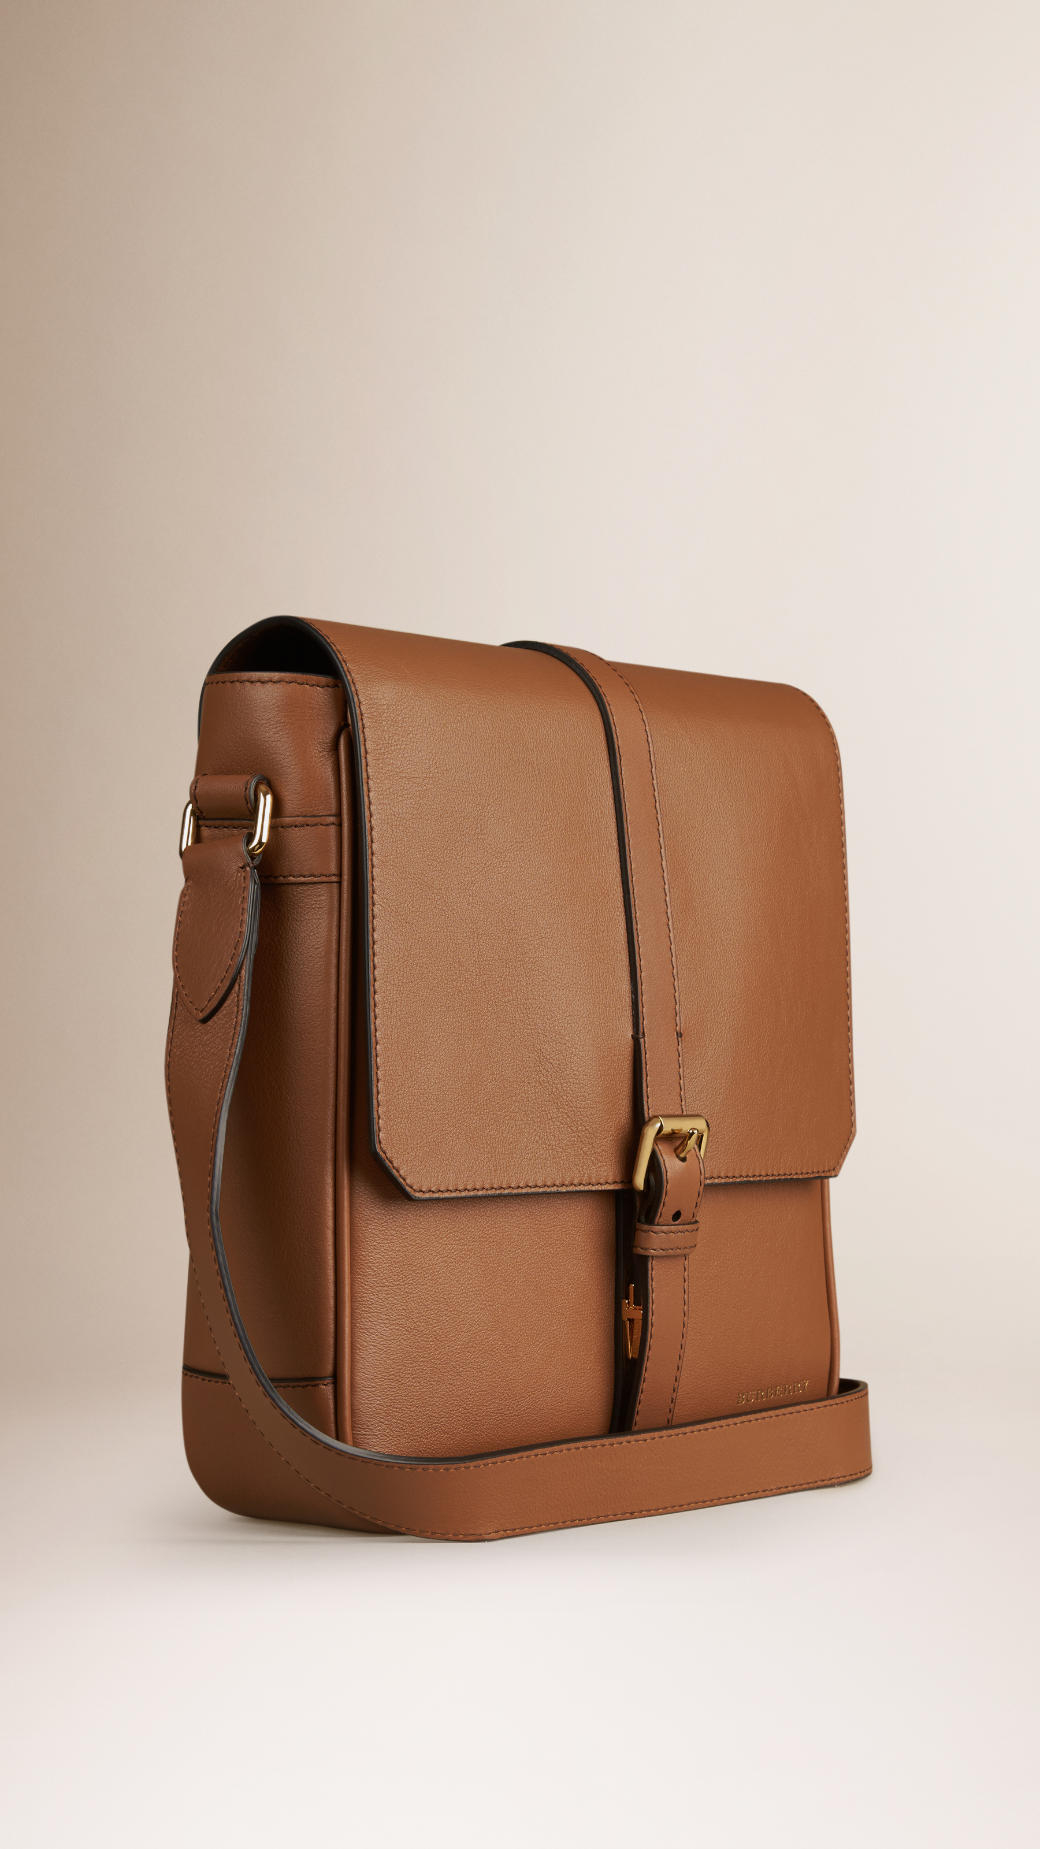 Burberry Soft Leather Crossbody Bag in Tan (Brown) for Men - Lyst